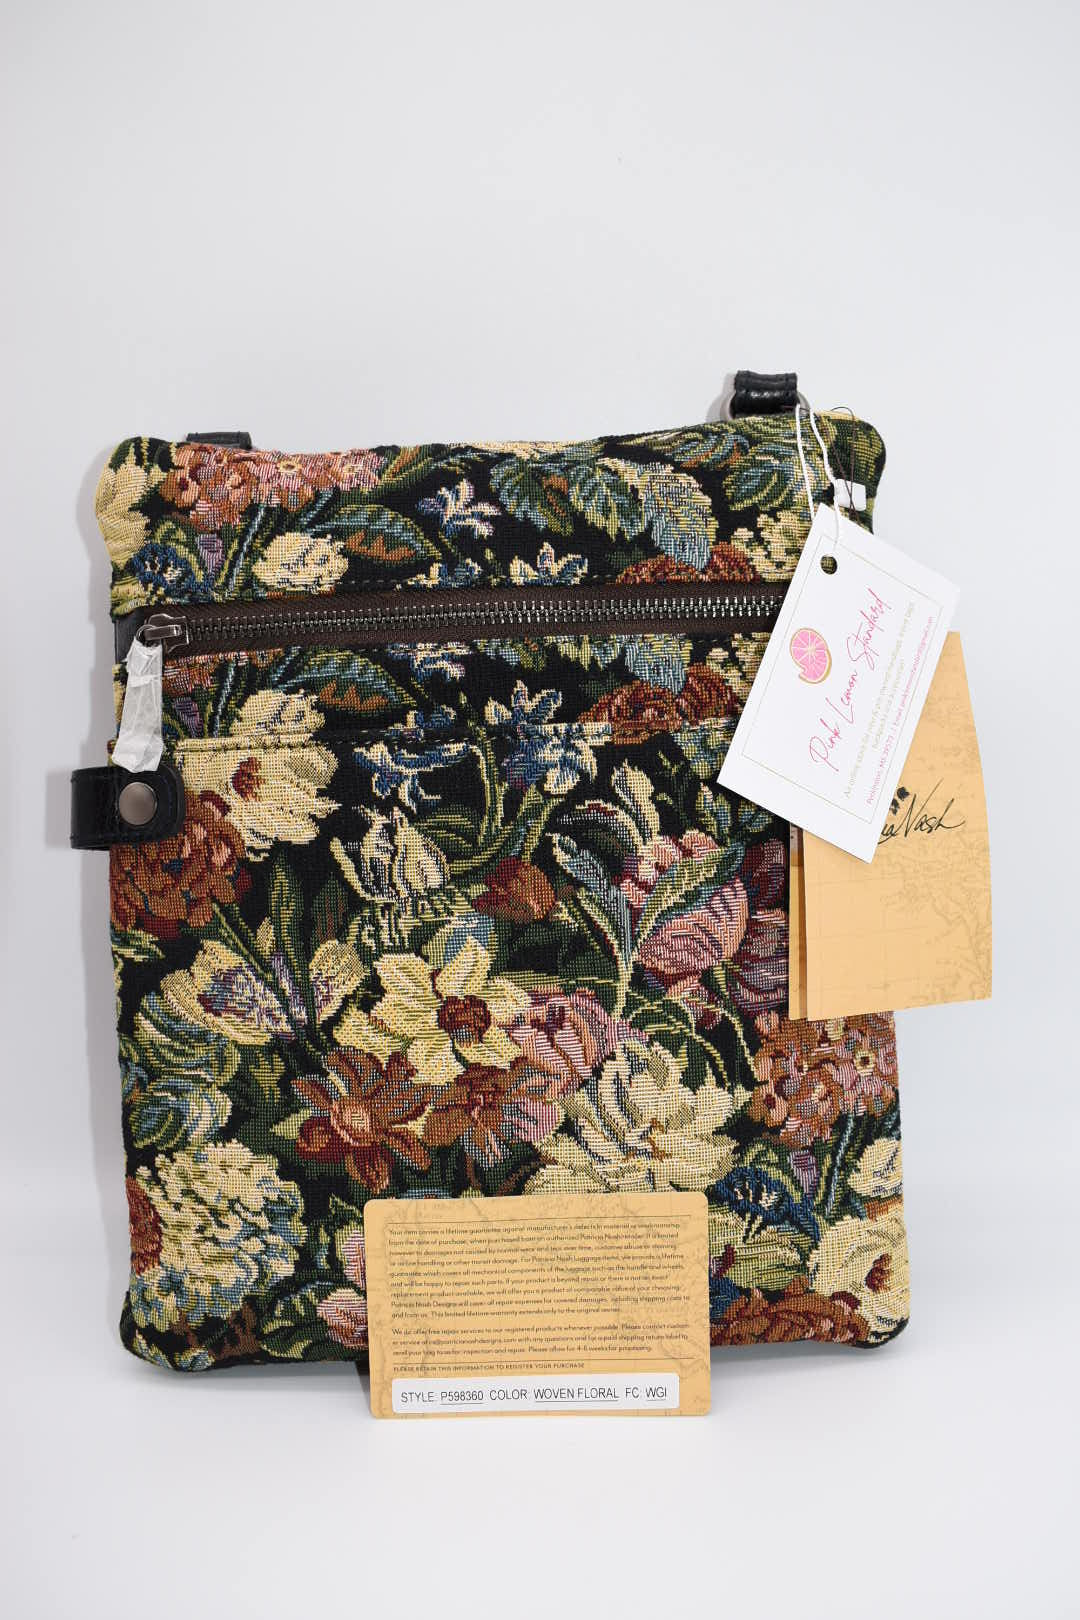 Patricia Nash Prizzi Leather Crossbody Bag in Woven Floral Tapestry